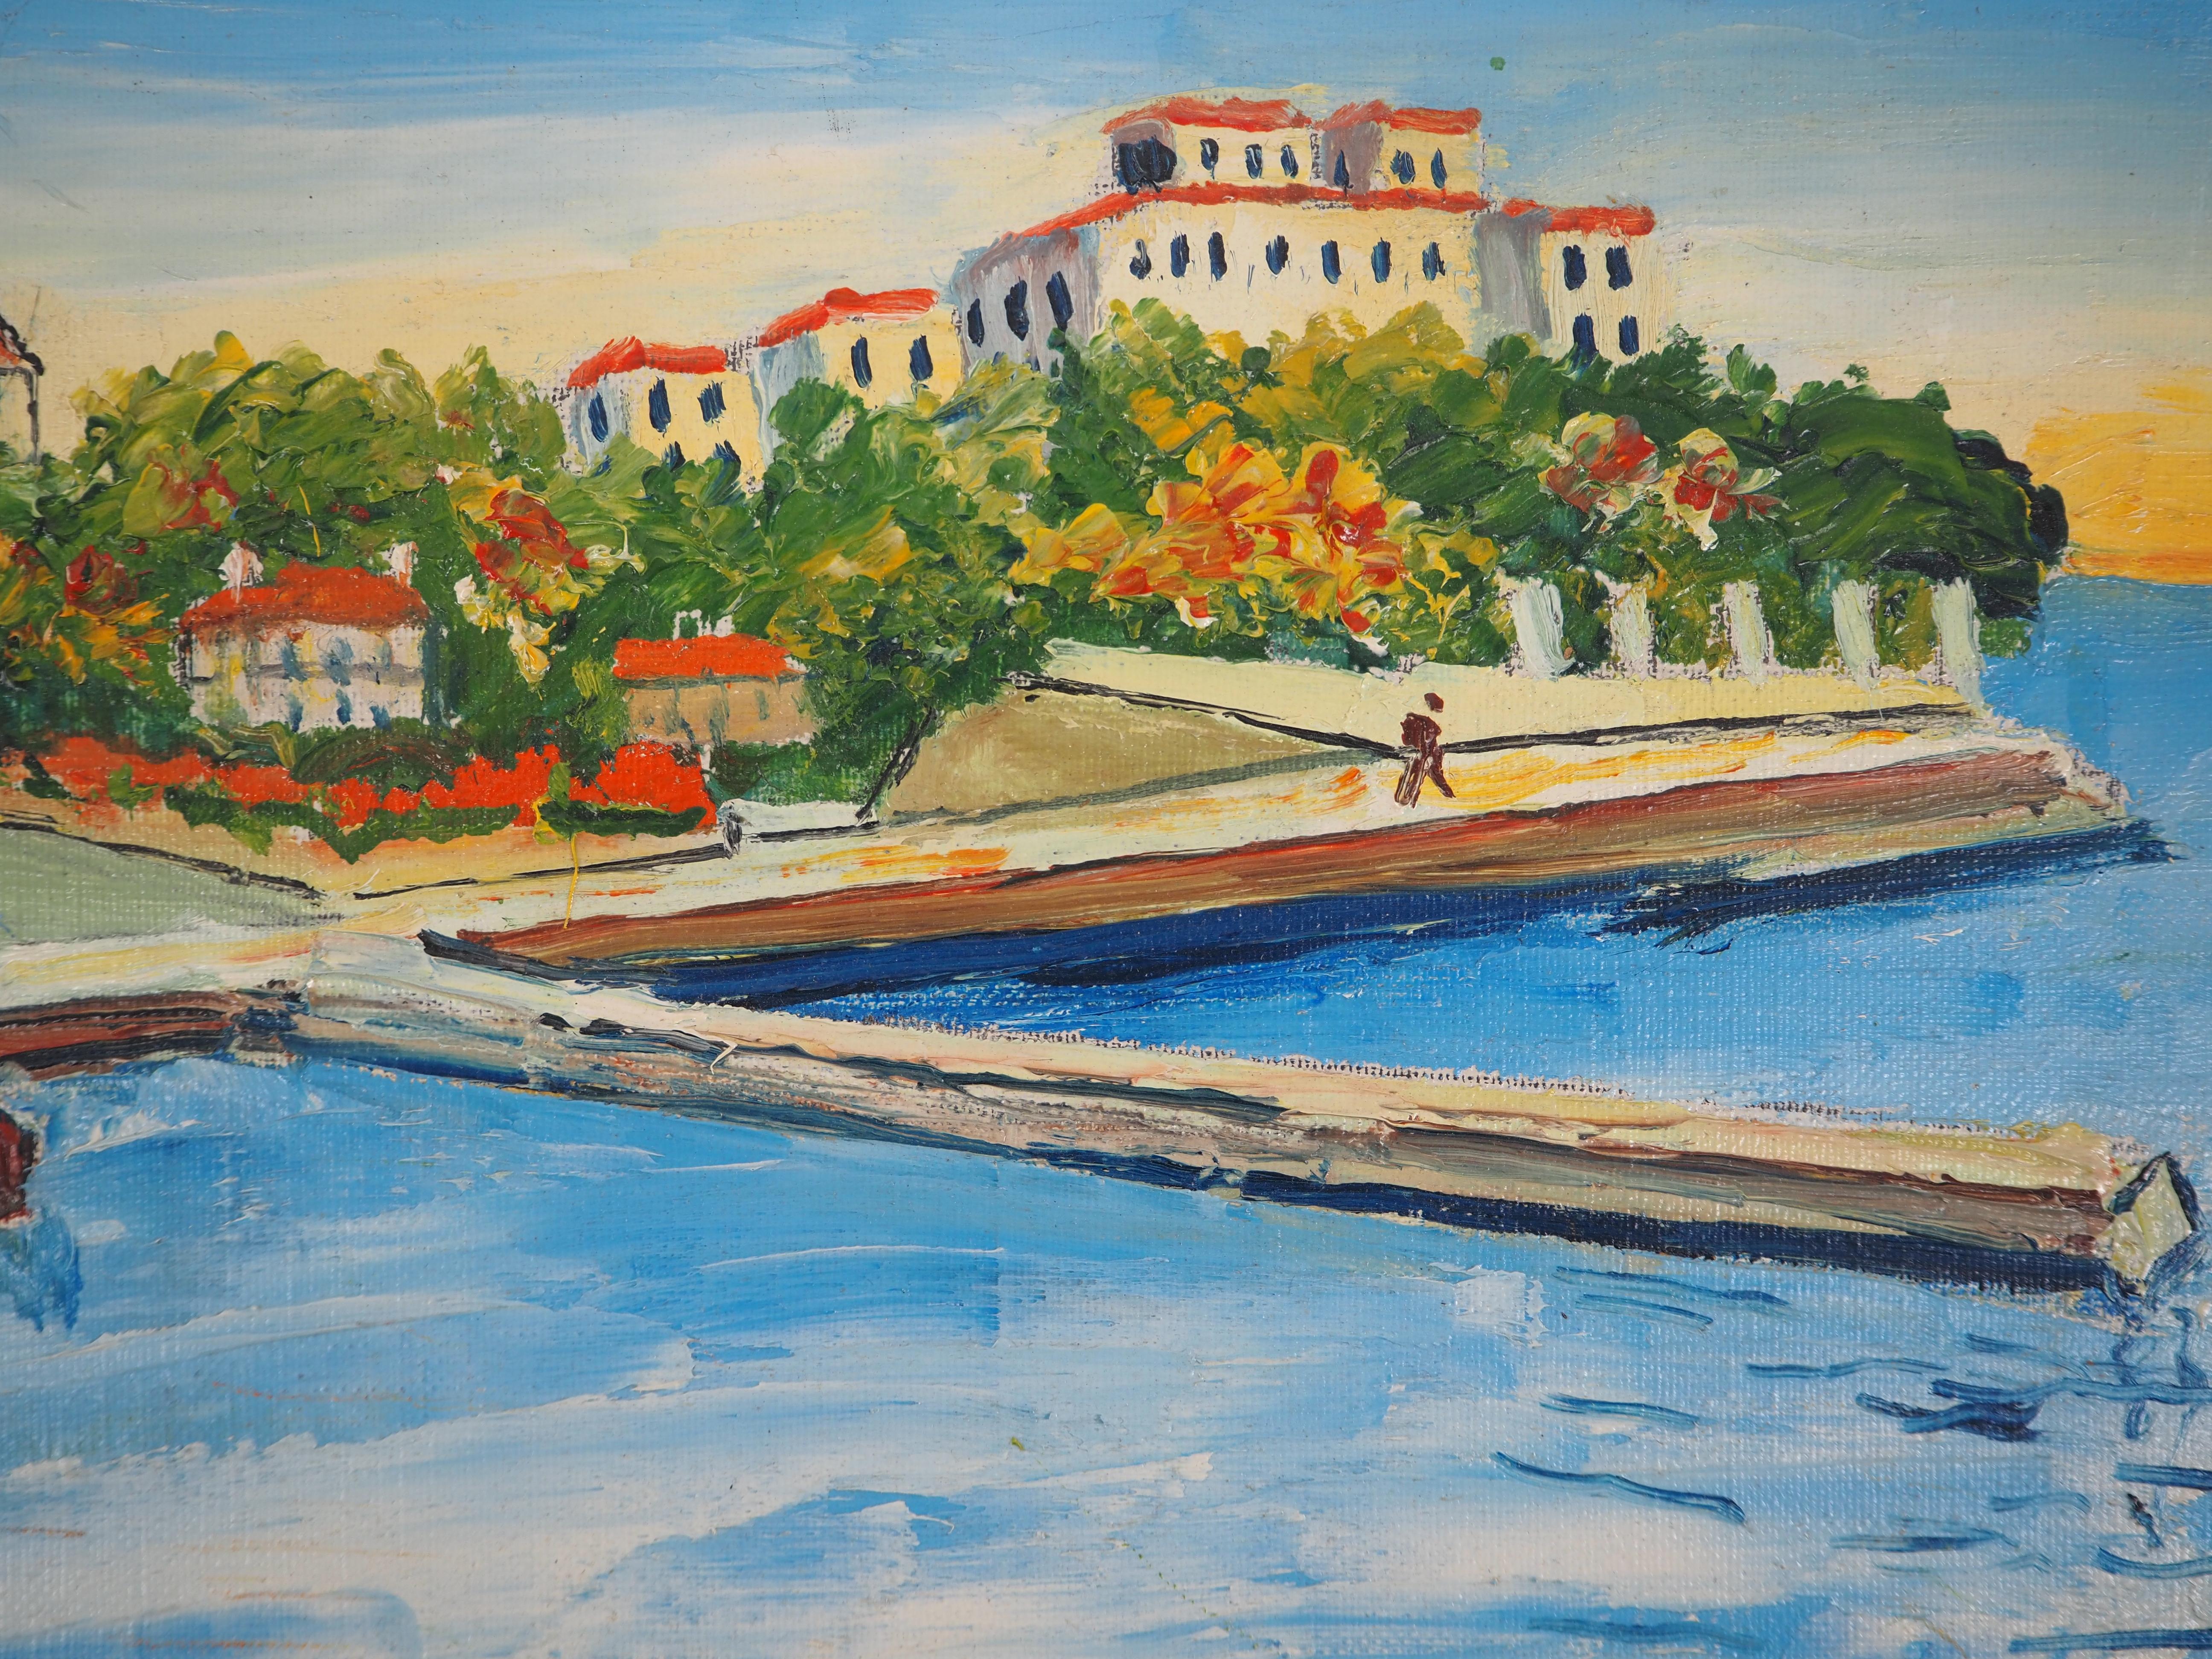 French Riviera : The Small Harbor of Beaulieu - Oil on Canvas - Signed - Post-Impressionist Painting by Elisée Maclet